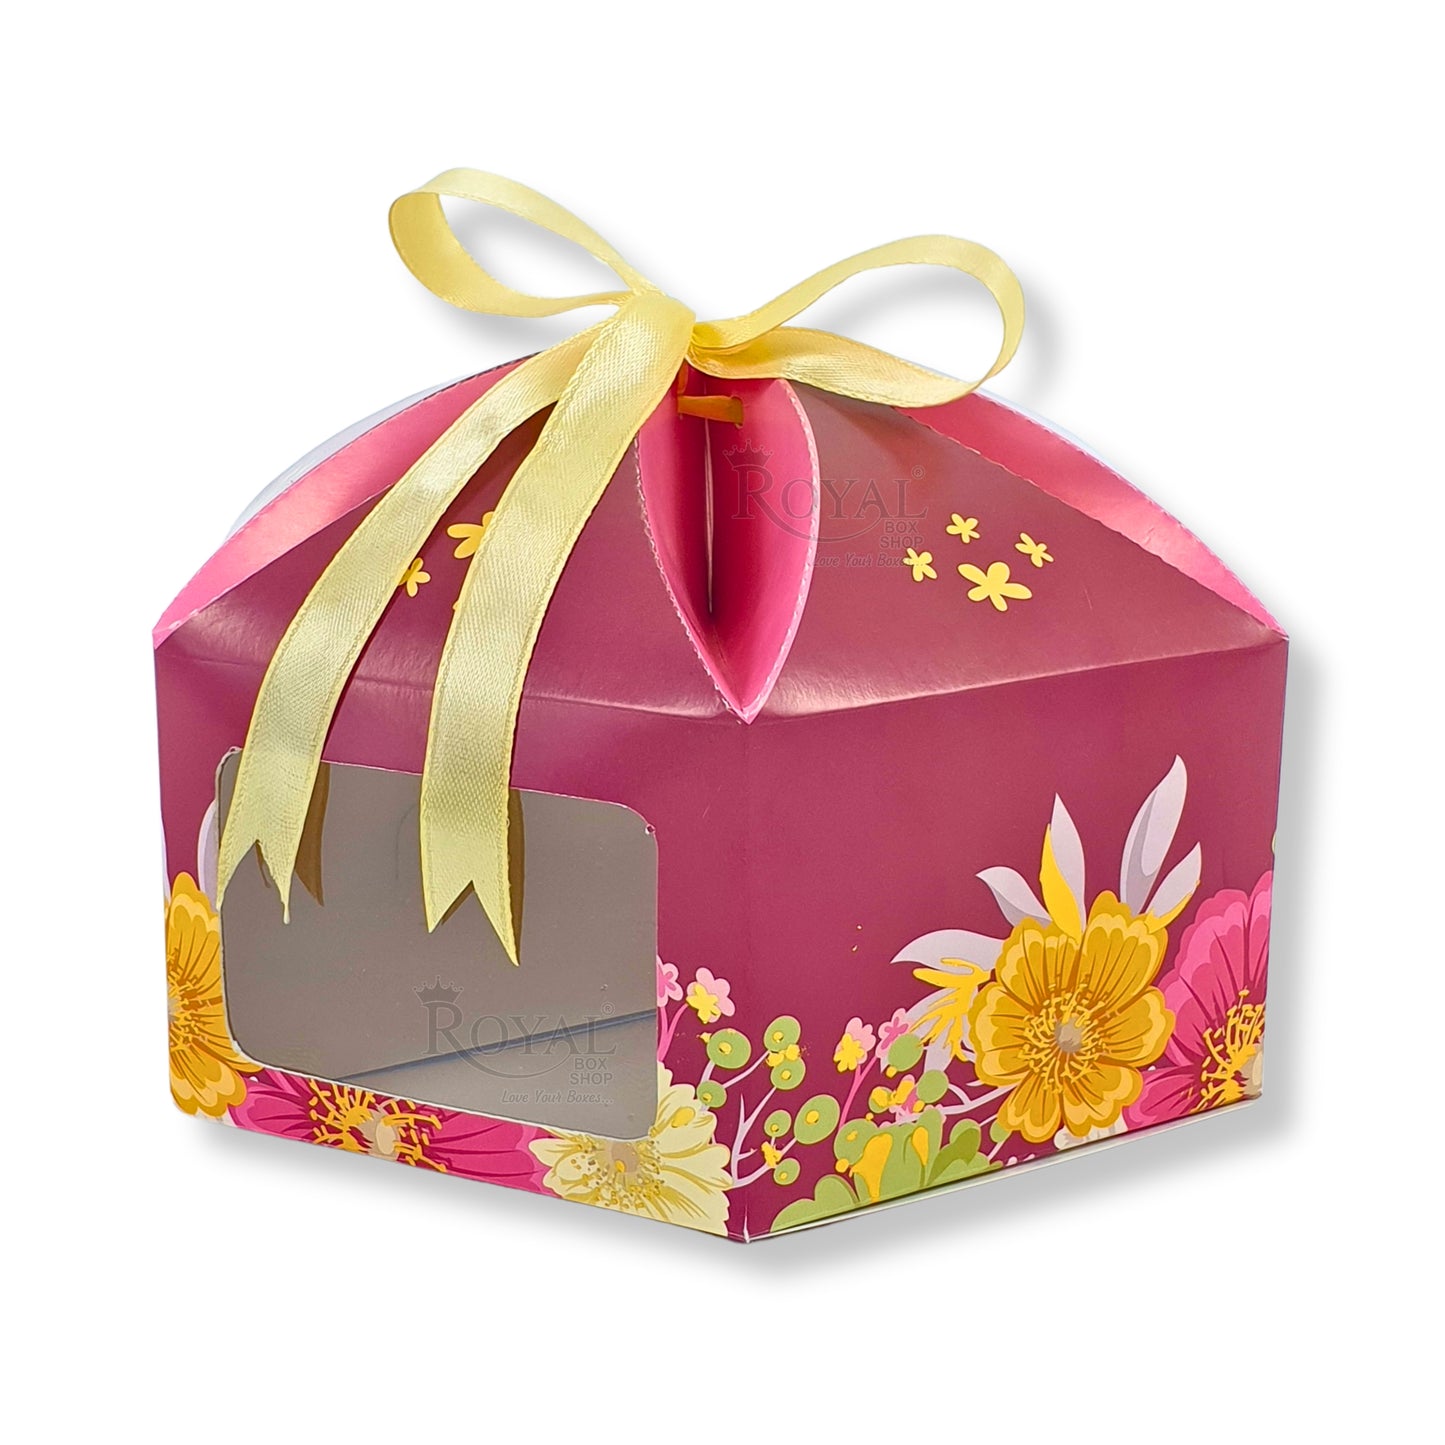 Dry Cake Box with Gold Foil Accents (7x7x3 Inch) Wine Flower